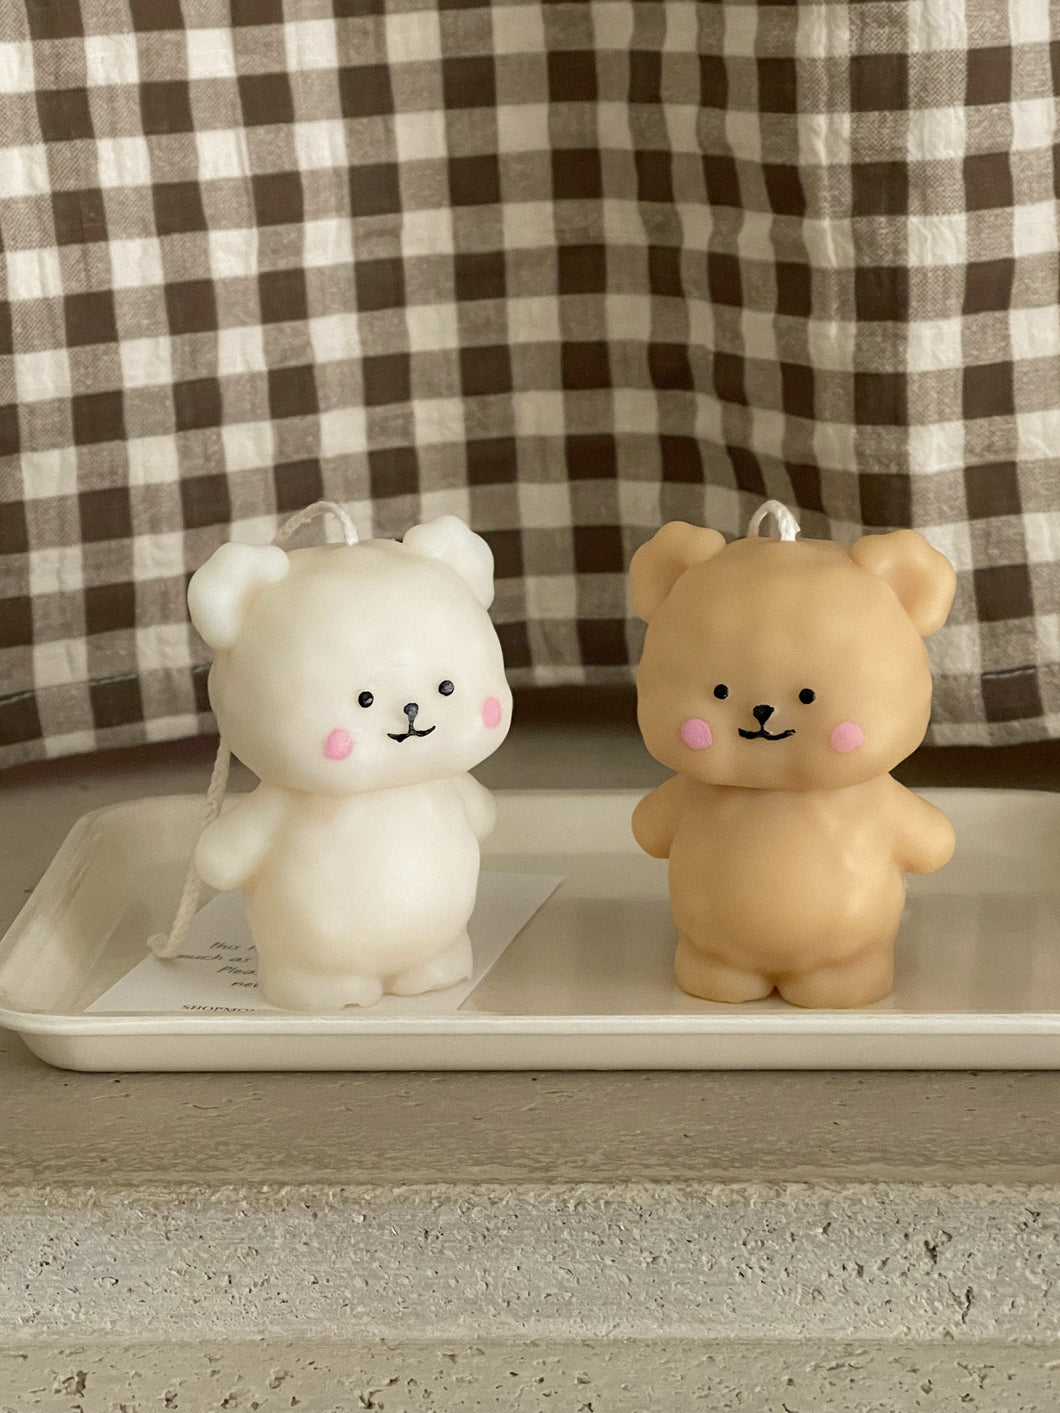 Teddy Bear Candle Set – Christen Your Room